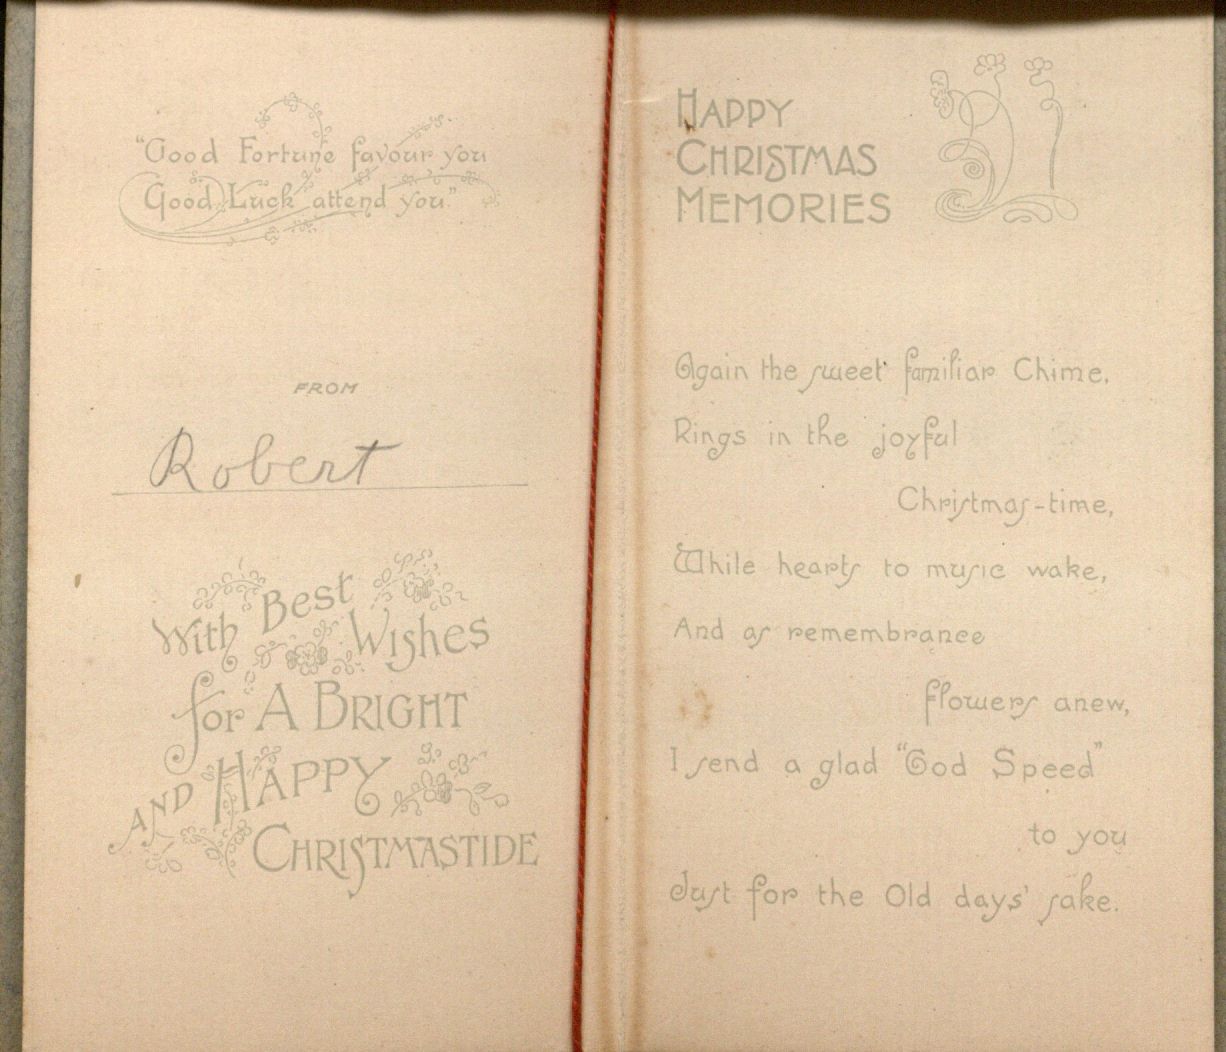 "With Best Wishes for a Bright and Happy Christmastide;" Holiday card, interior (from "Robert"), undated.